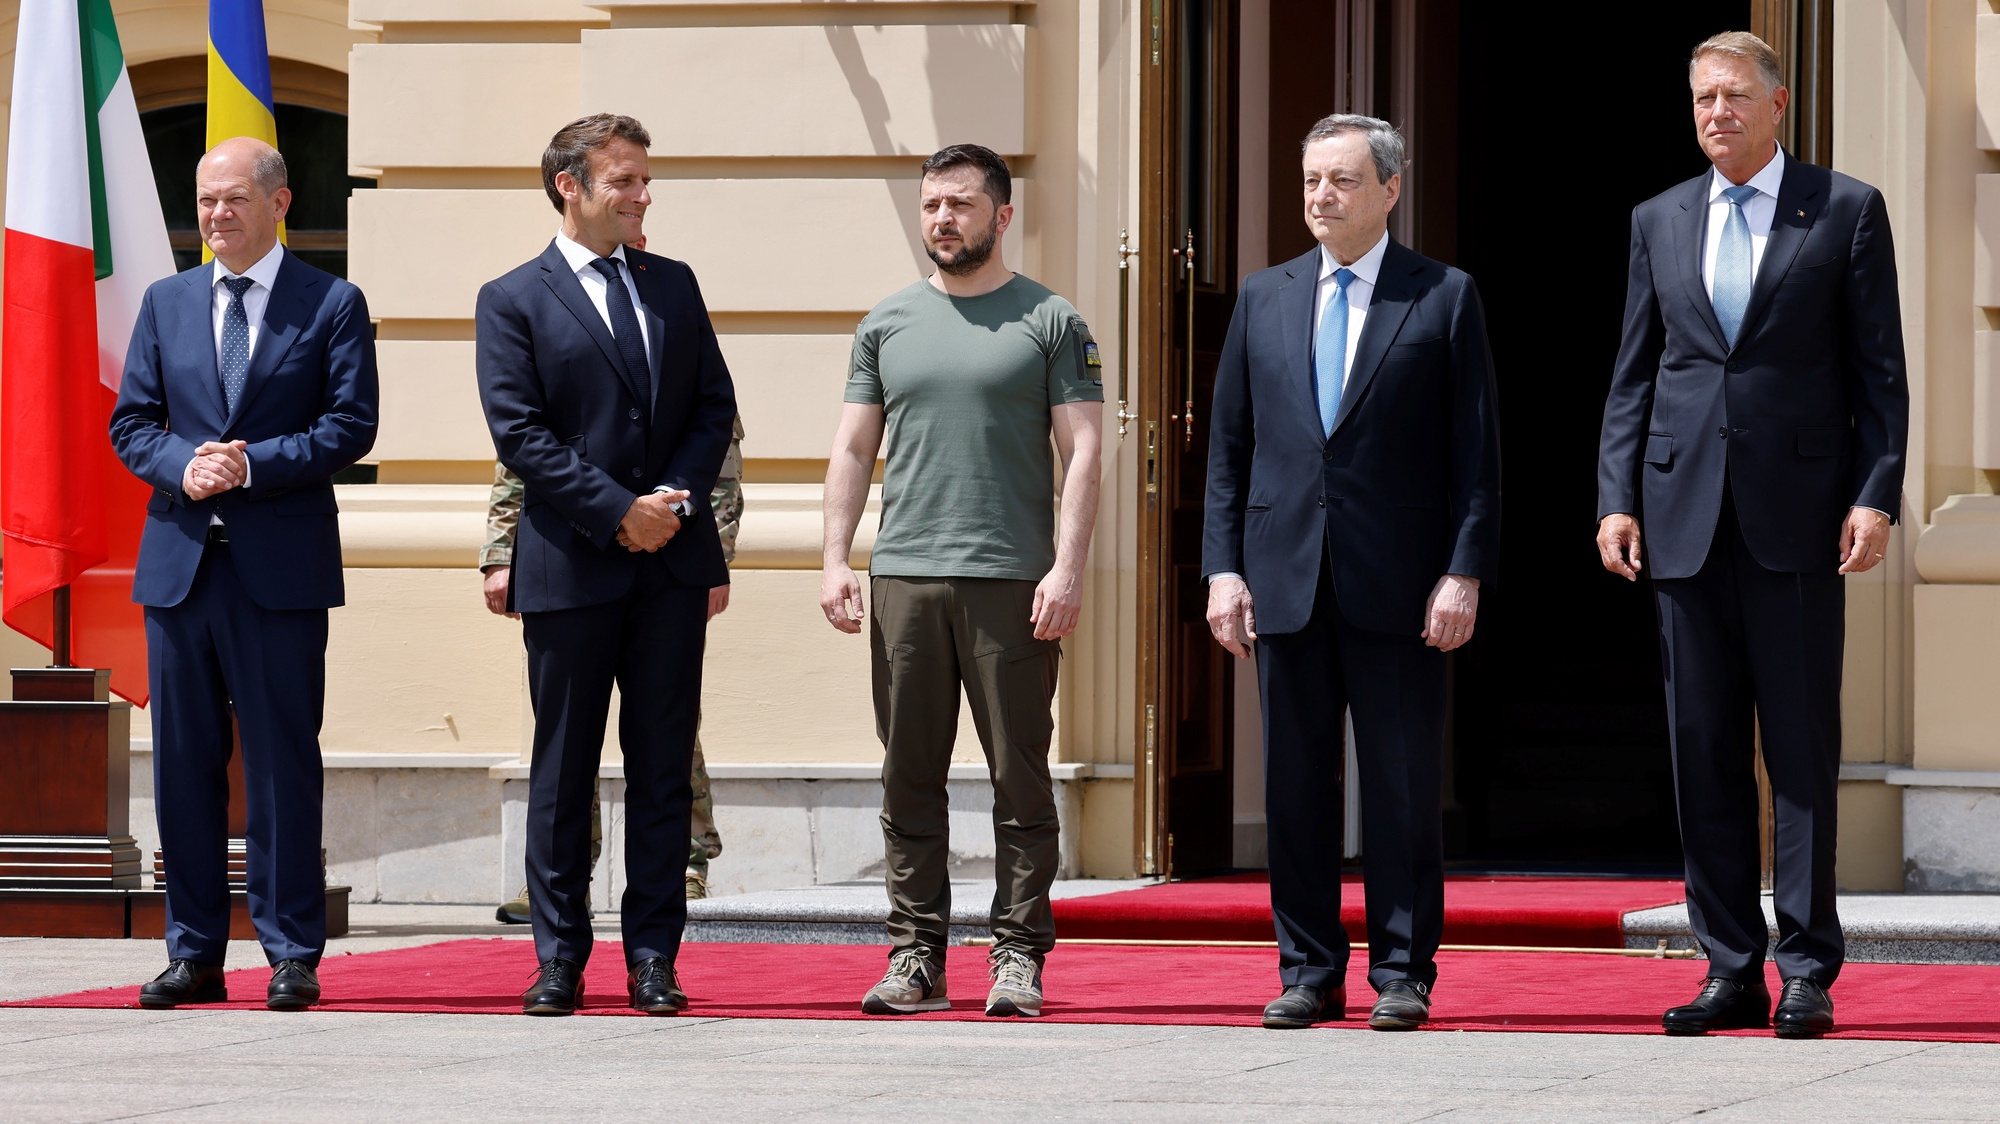 epa10016040 Ukrainian President Volodymyr Zelensky (C) poses next to (L-R) Germany&#039;s Chancellor Olaf Scholz, France&#039;s President Emmanuel Macron, Italy&#039;s Prime Minister Mario Draghi and Romania&#039;s President Klaus Werner Iohannis prior to their meeting in Kyiv, Ukraine, 16 June 2022. French President Emmanuel Macron, Italian Prime Minister Mario Draghi and German Chancellor Olaf Scholz arrived on a night train from Poland to Kyiv and meet with Ukrainian President Volodymyr Zelensky, at a time when the country is pushing for EU membership.  EPA/LUDOVIC MARIN / POOL  MAXPPP OUT